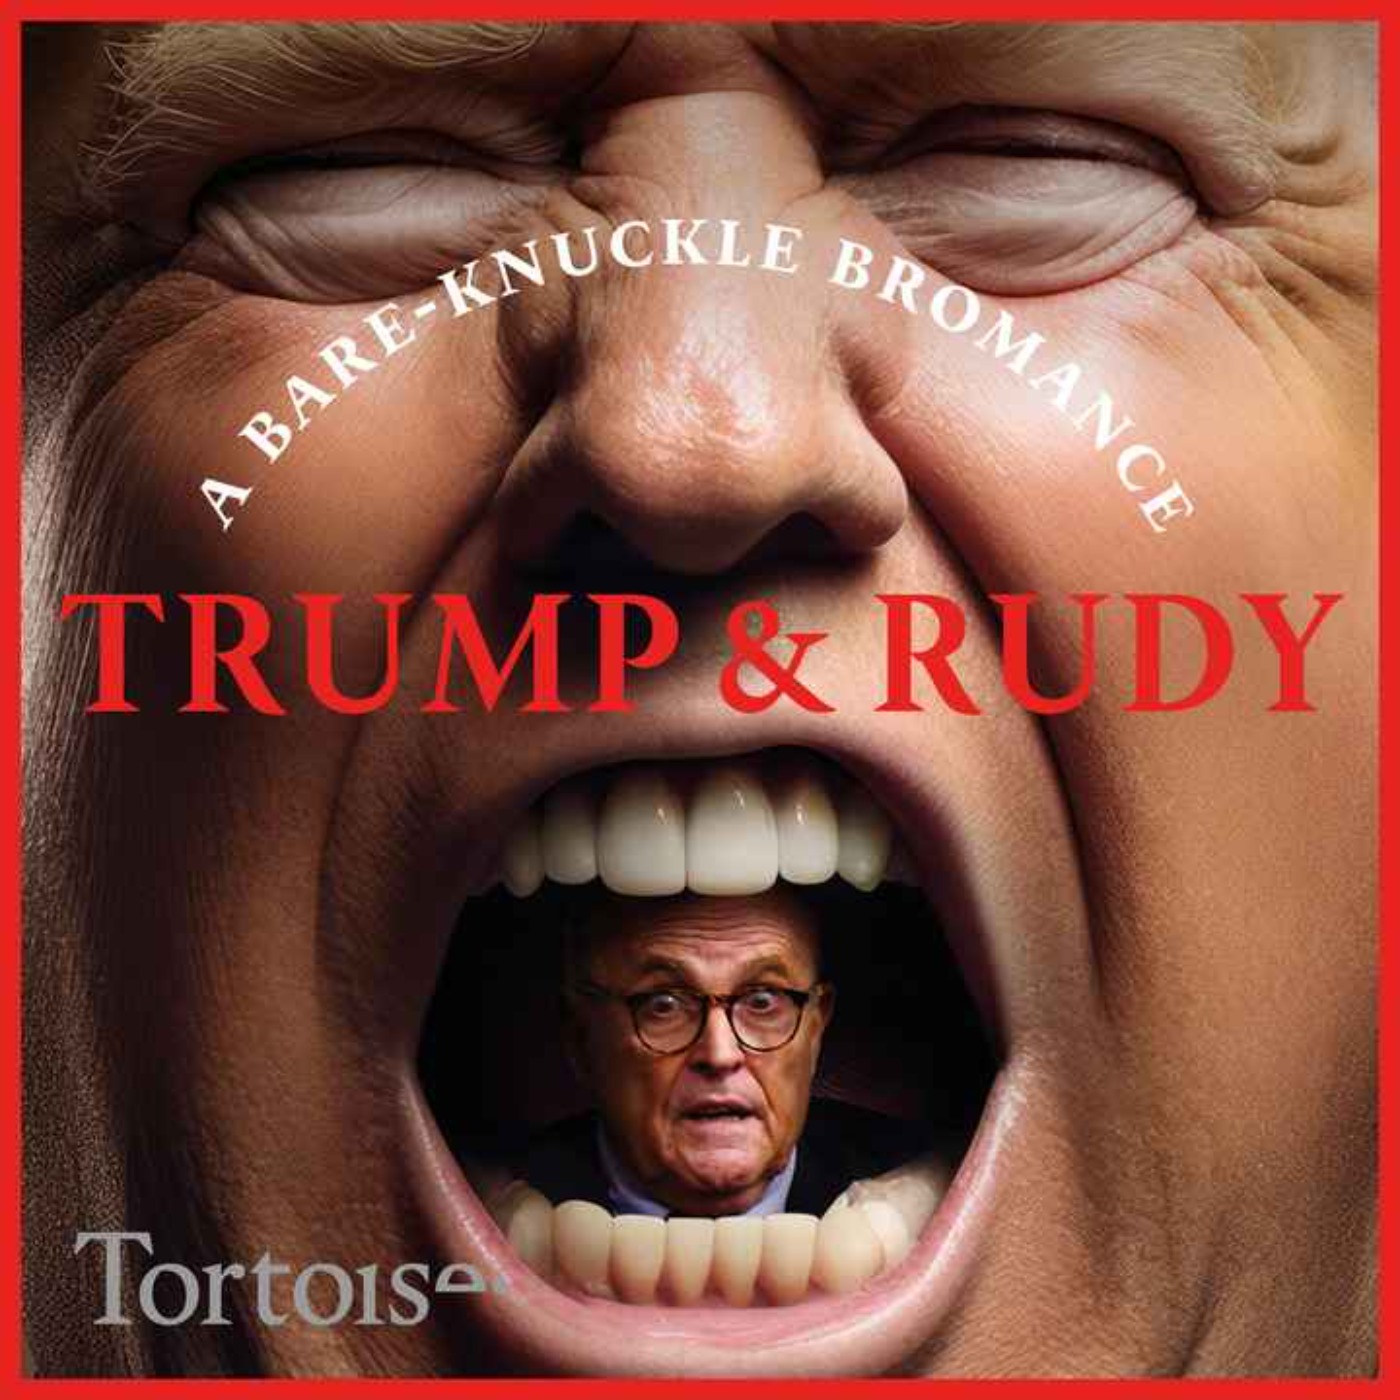 Trump and Rudy: A bare-knuckle romance - episode 2